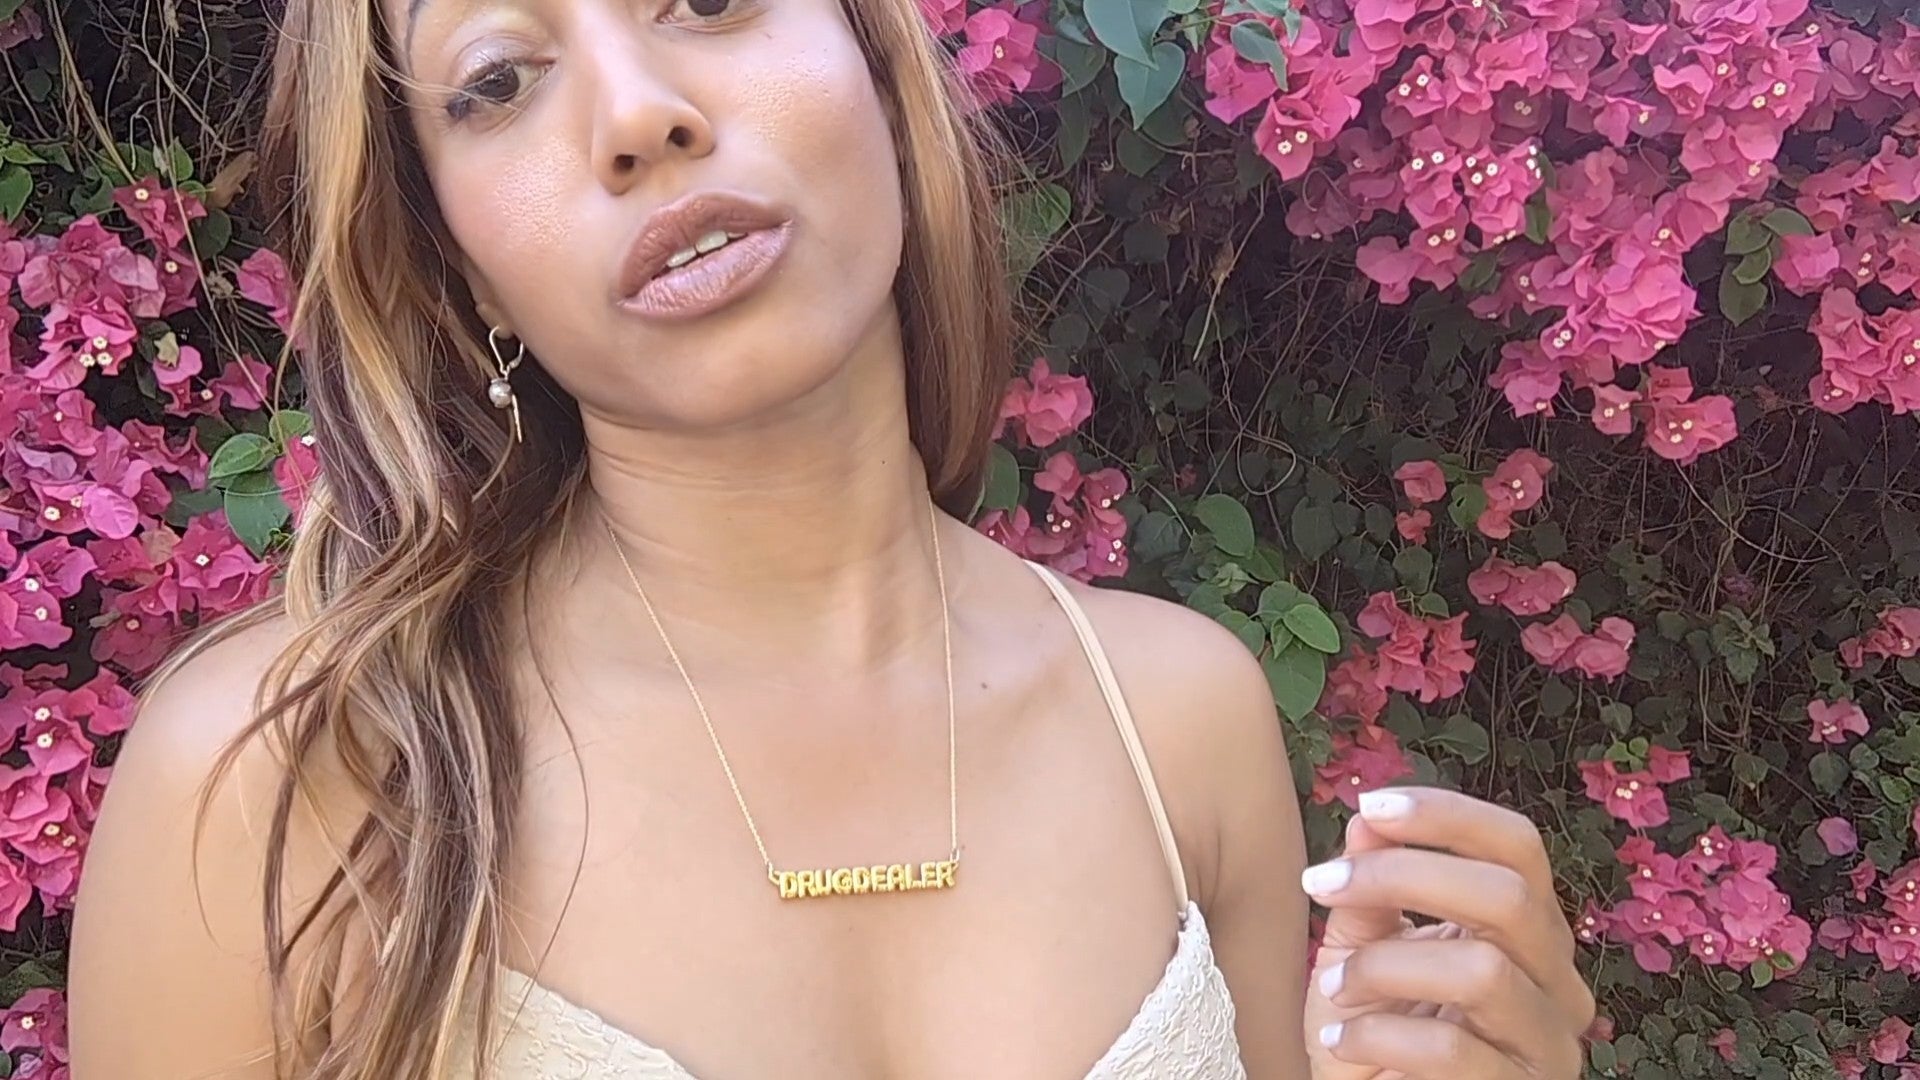 woman in tan bikini top standing in front of pink roses wearing the drug dealer nameplate necklace from the wandering jewel